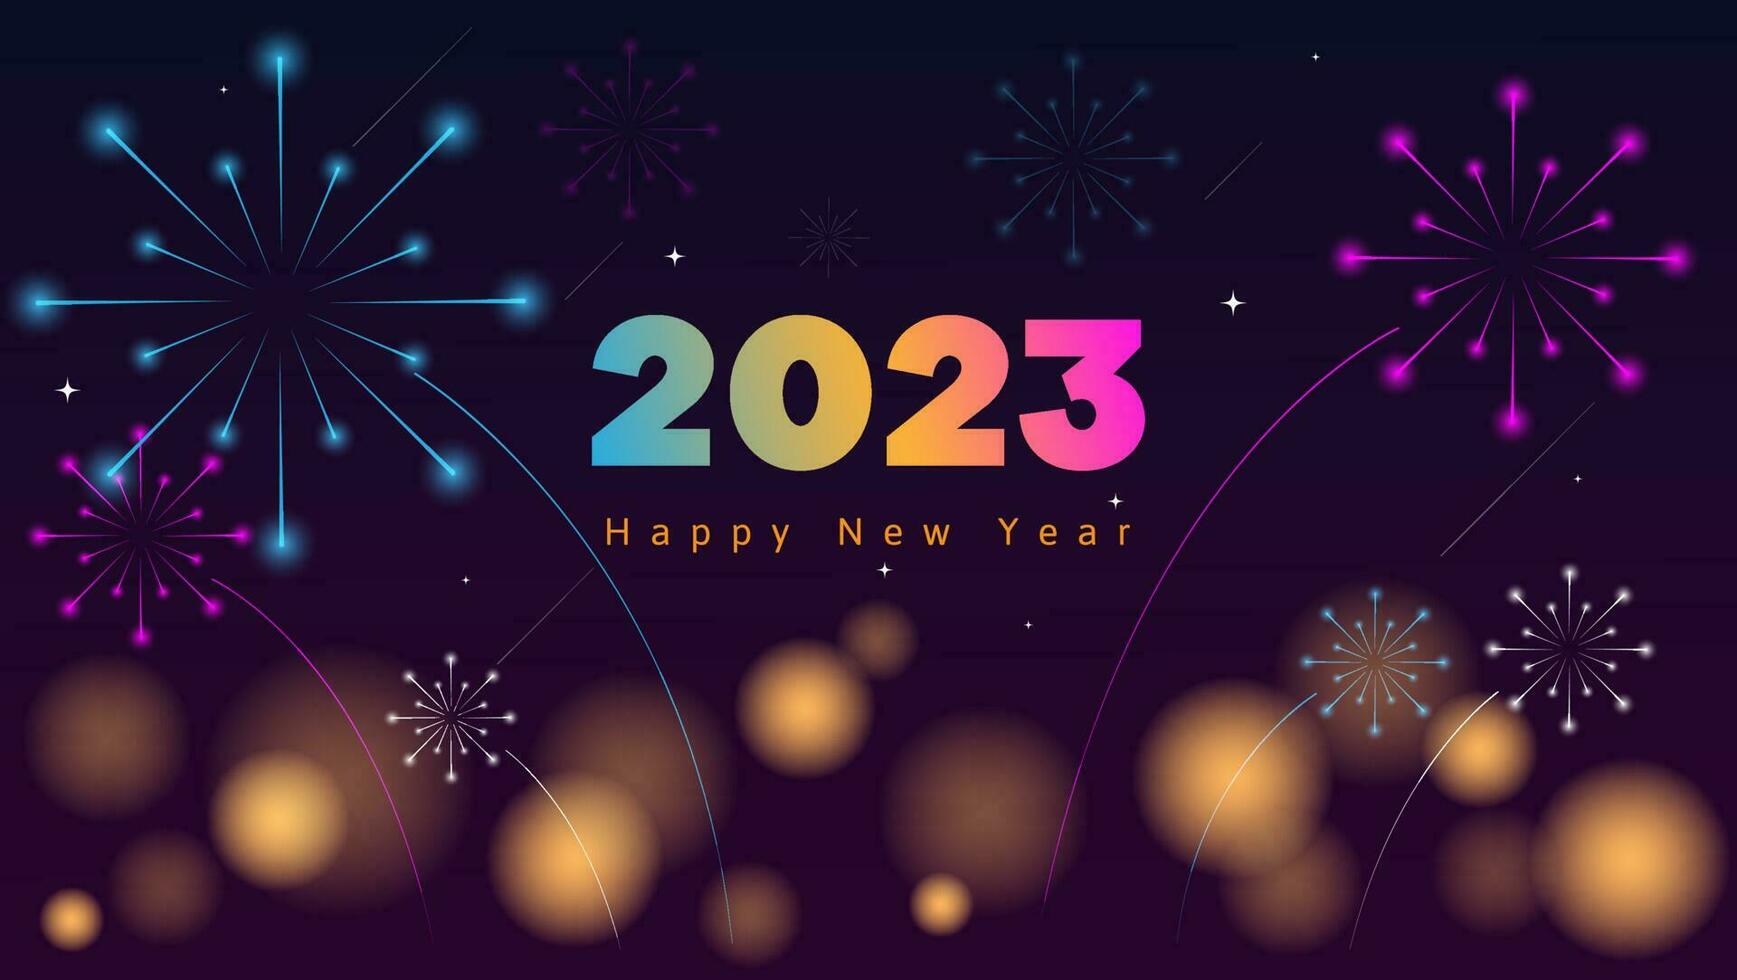 colorful happy new year background with fireworks and lights. vector illustration